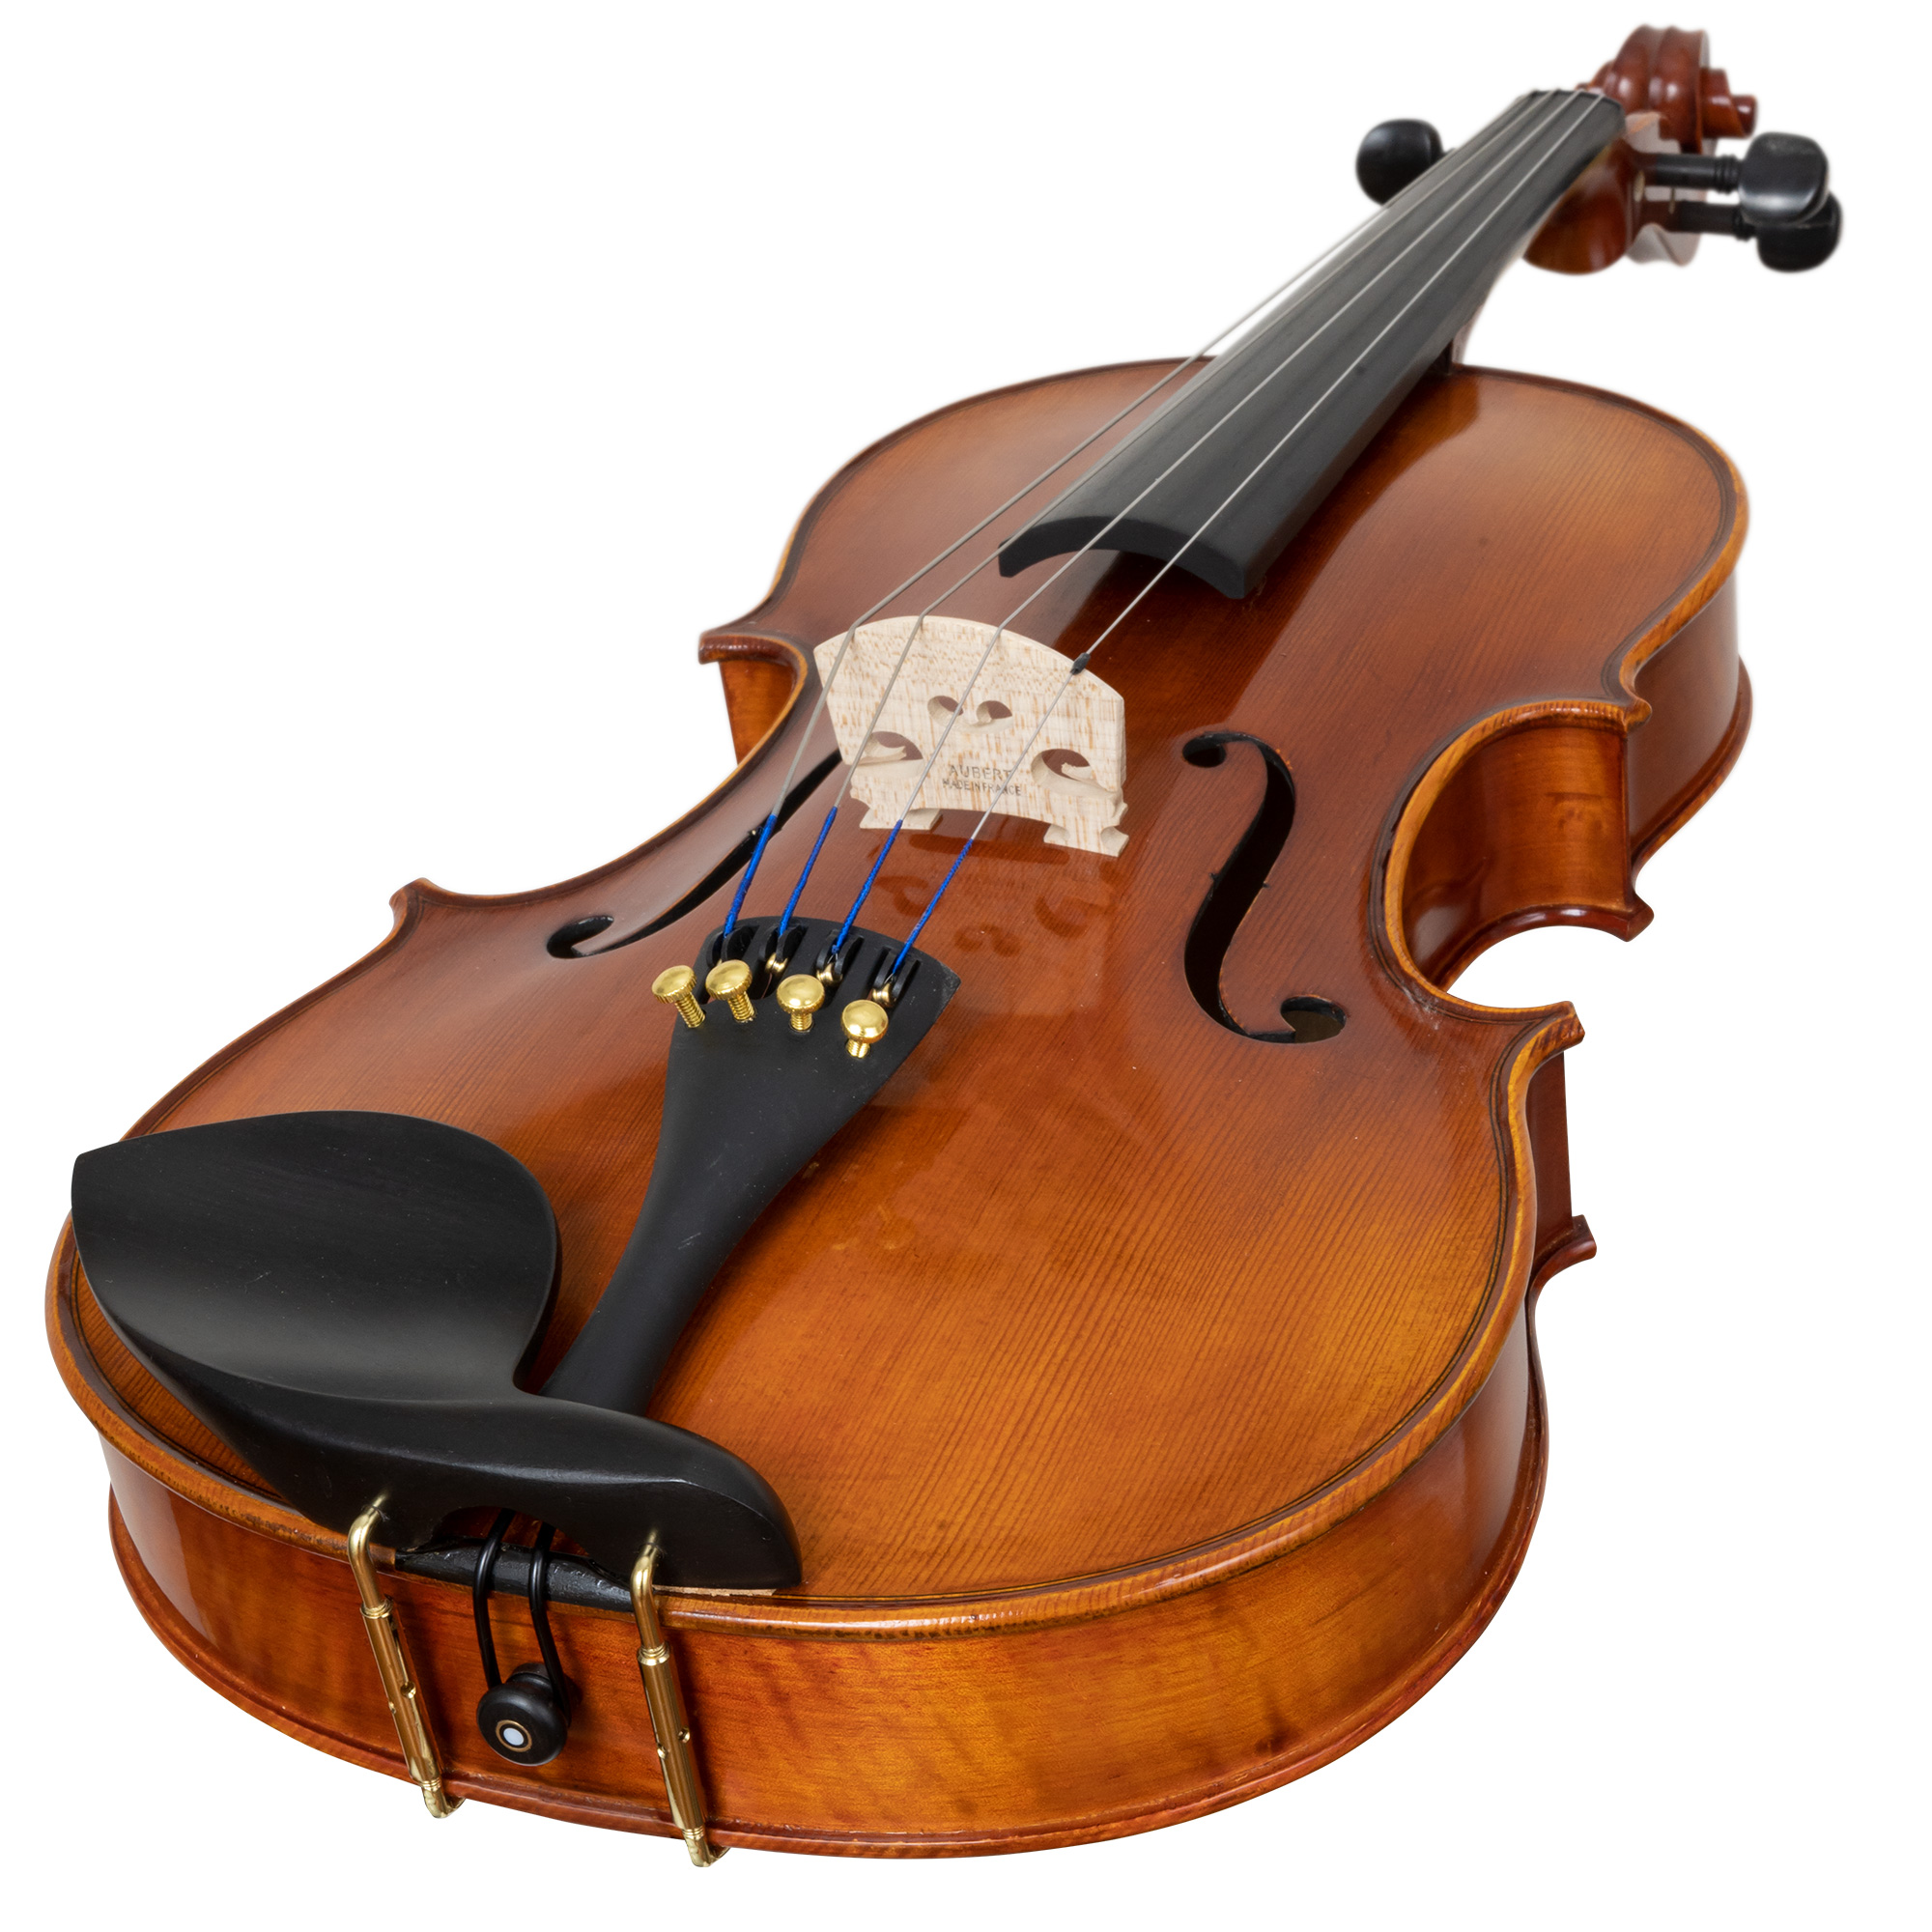 CLEARANCE Antonio Giuliani Etude Viola Outfit in action